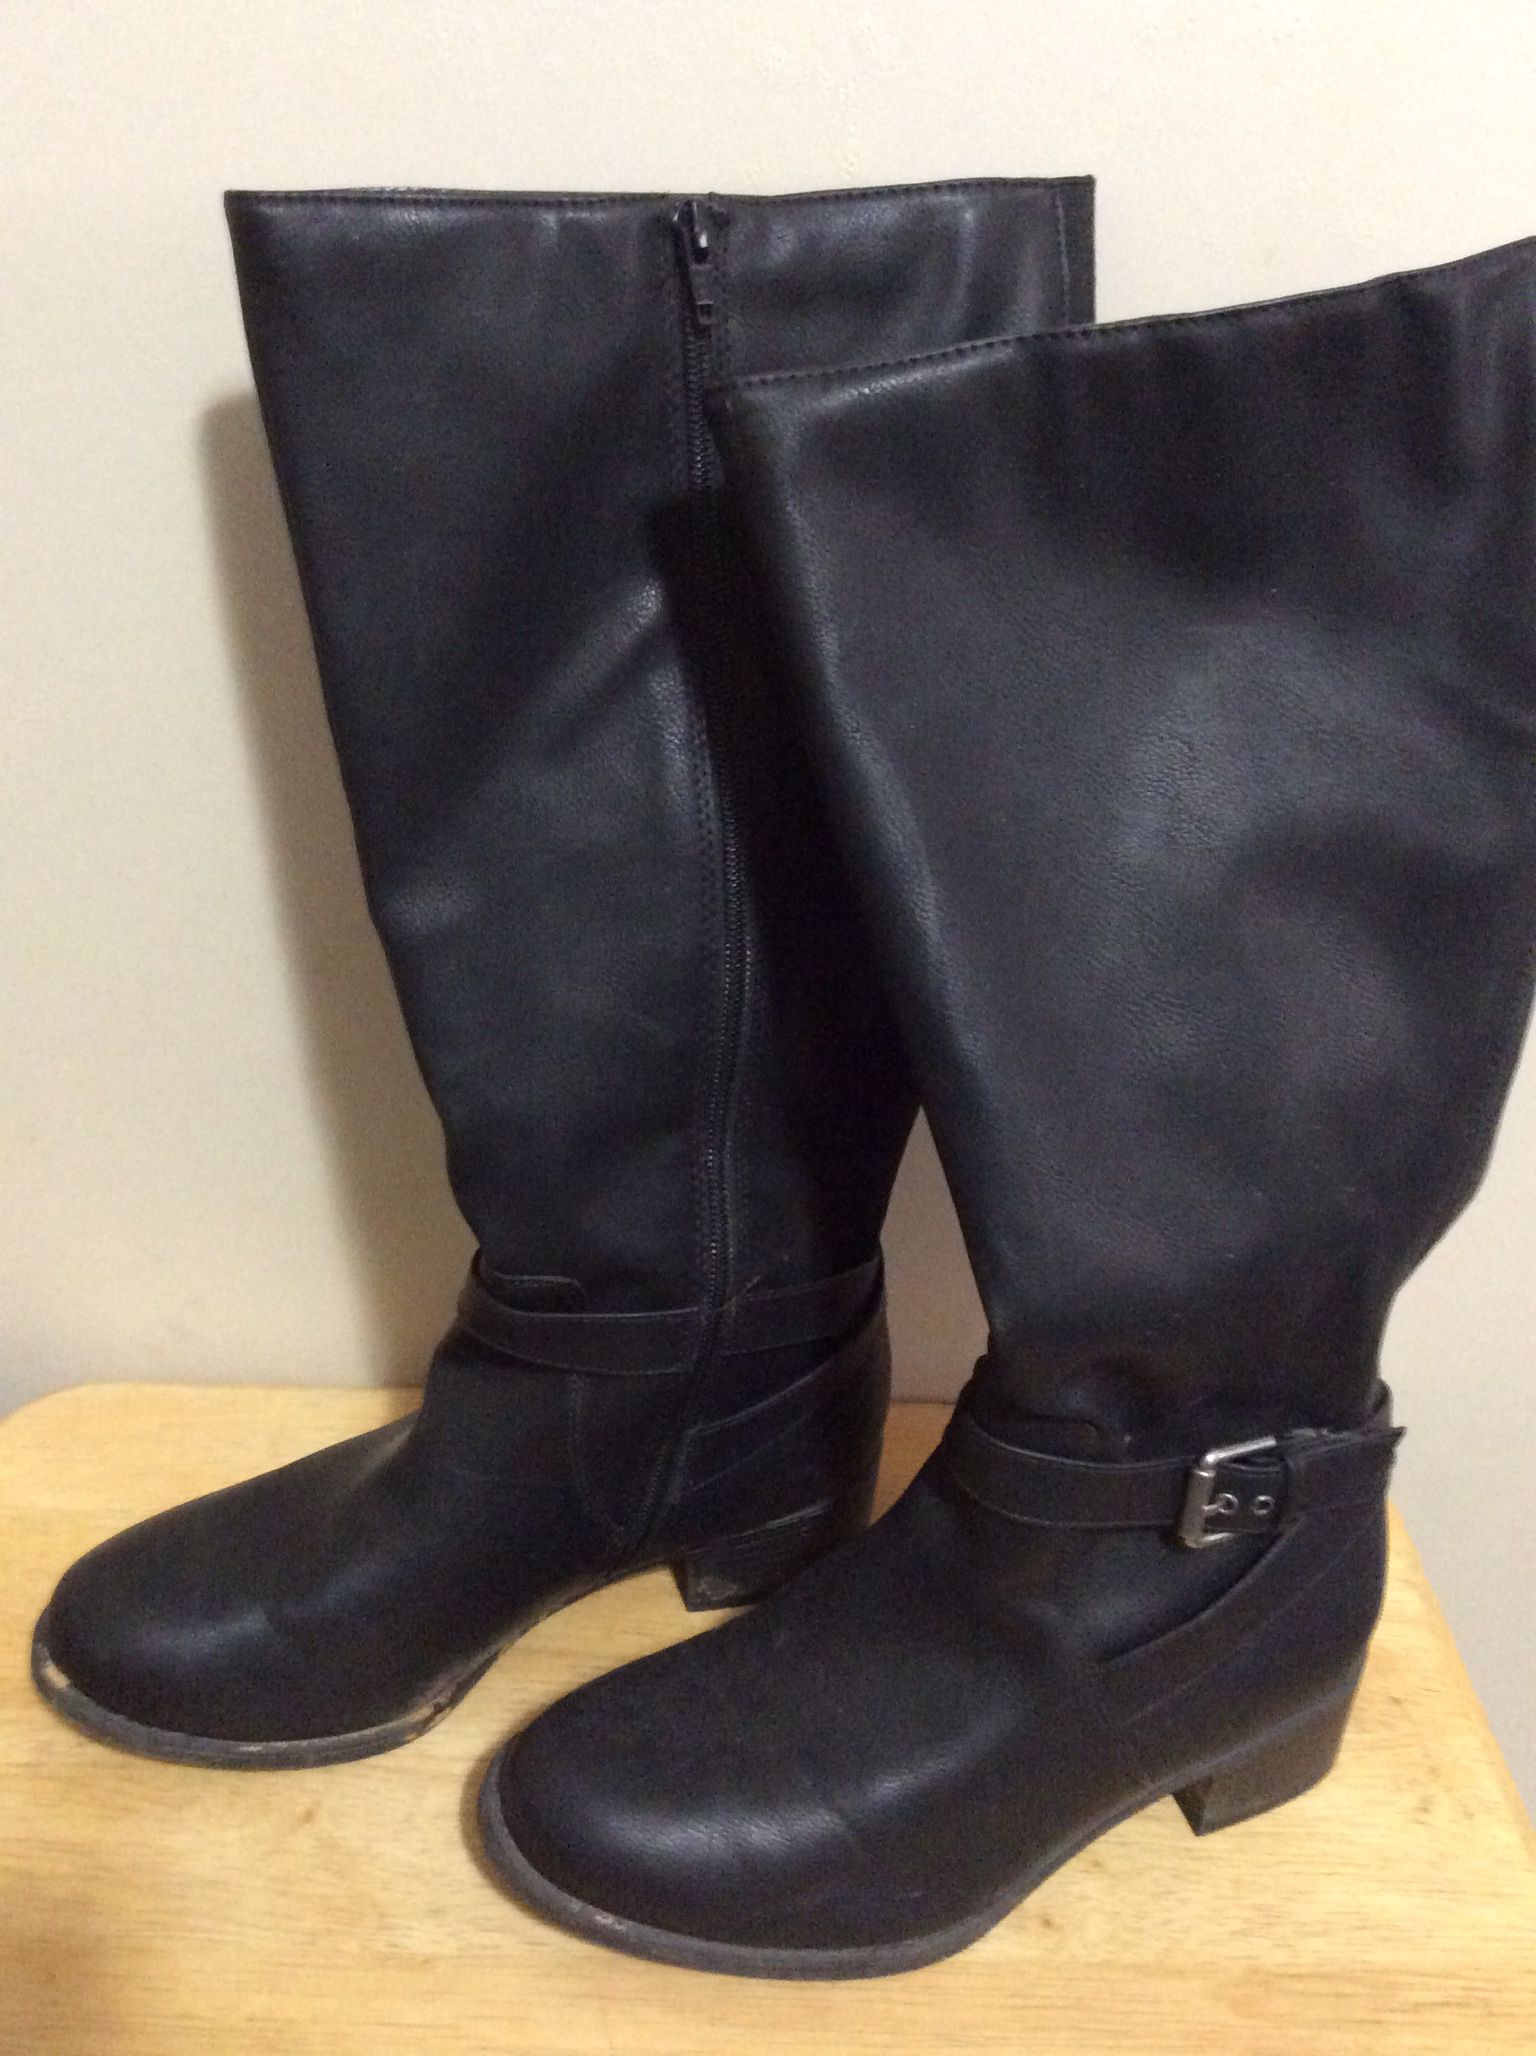 A GENTLY USED PAIR OF WOMENS BLACK BOOTS - Sz 6.5 W